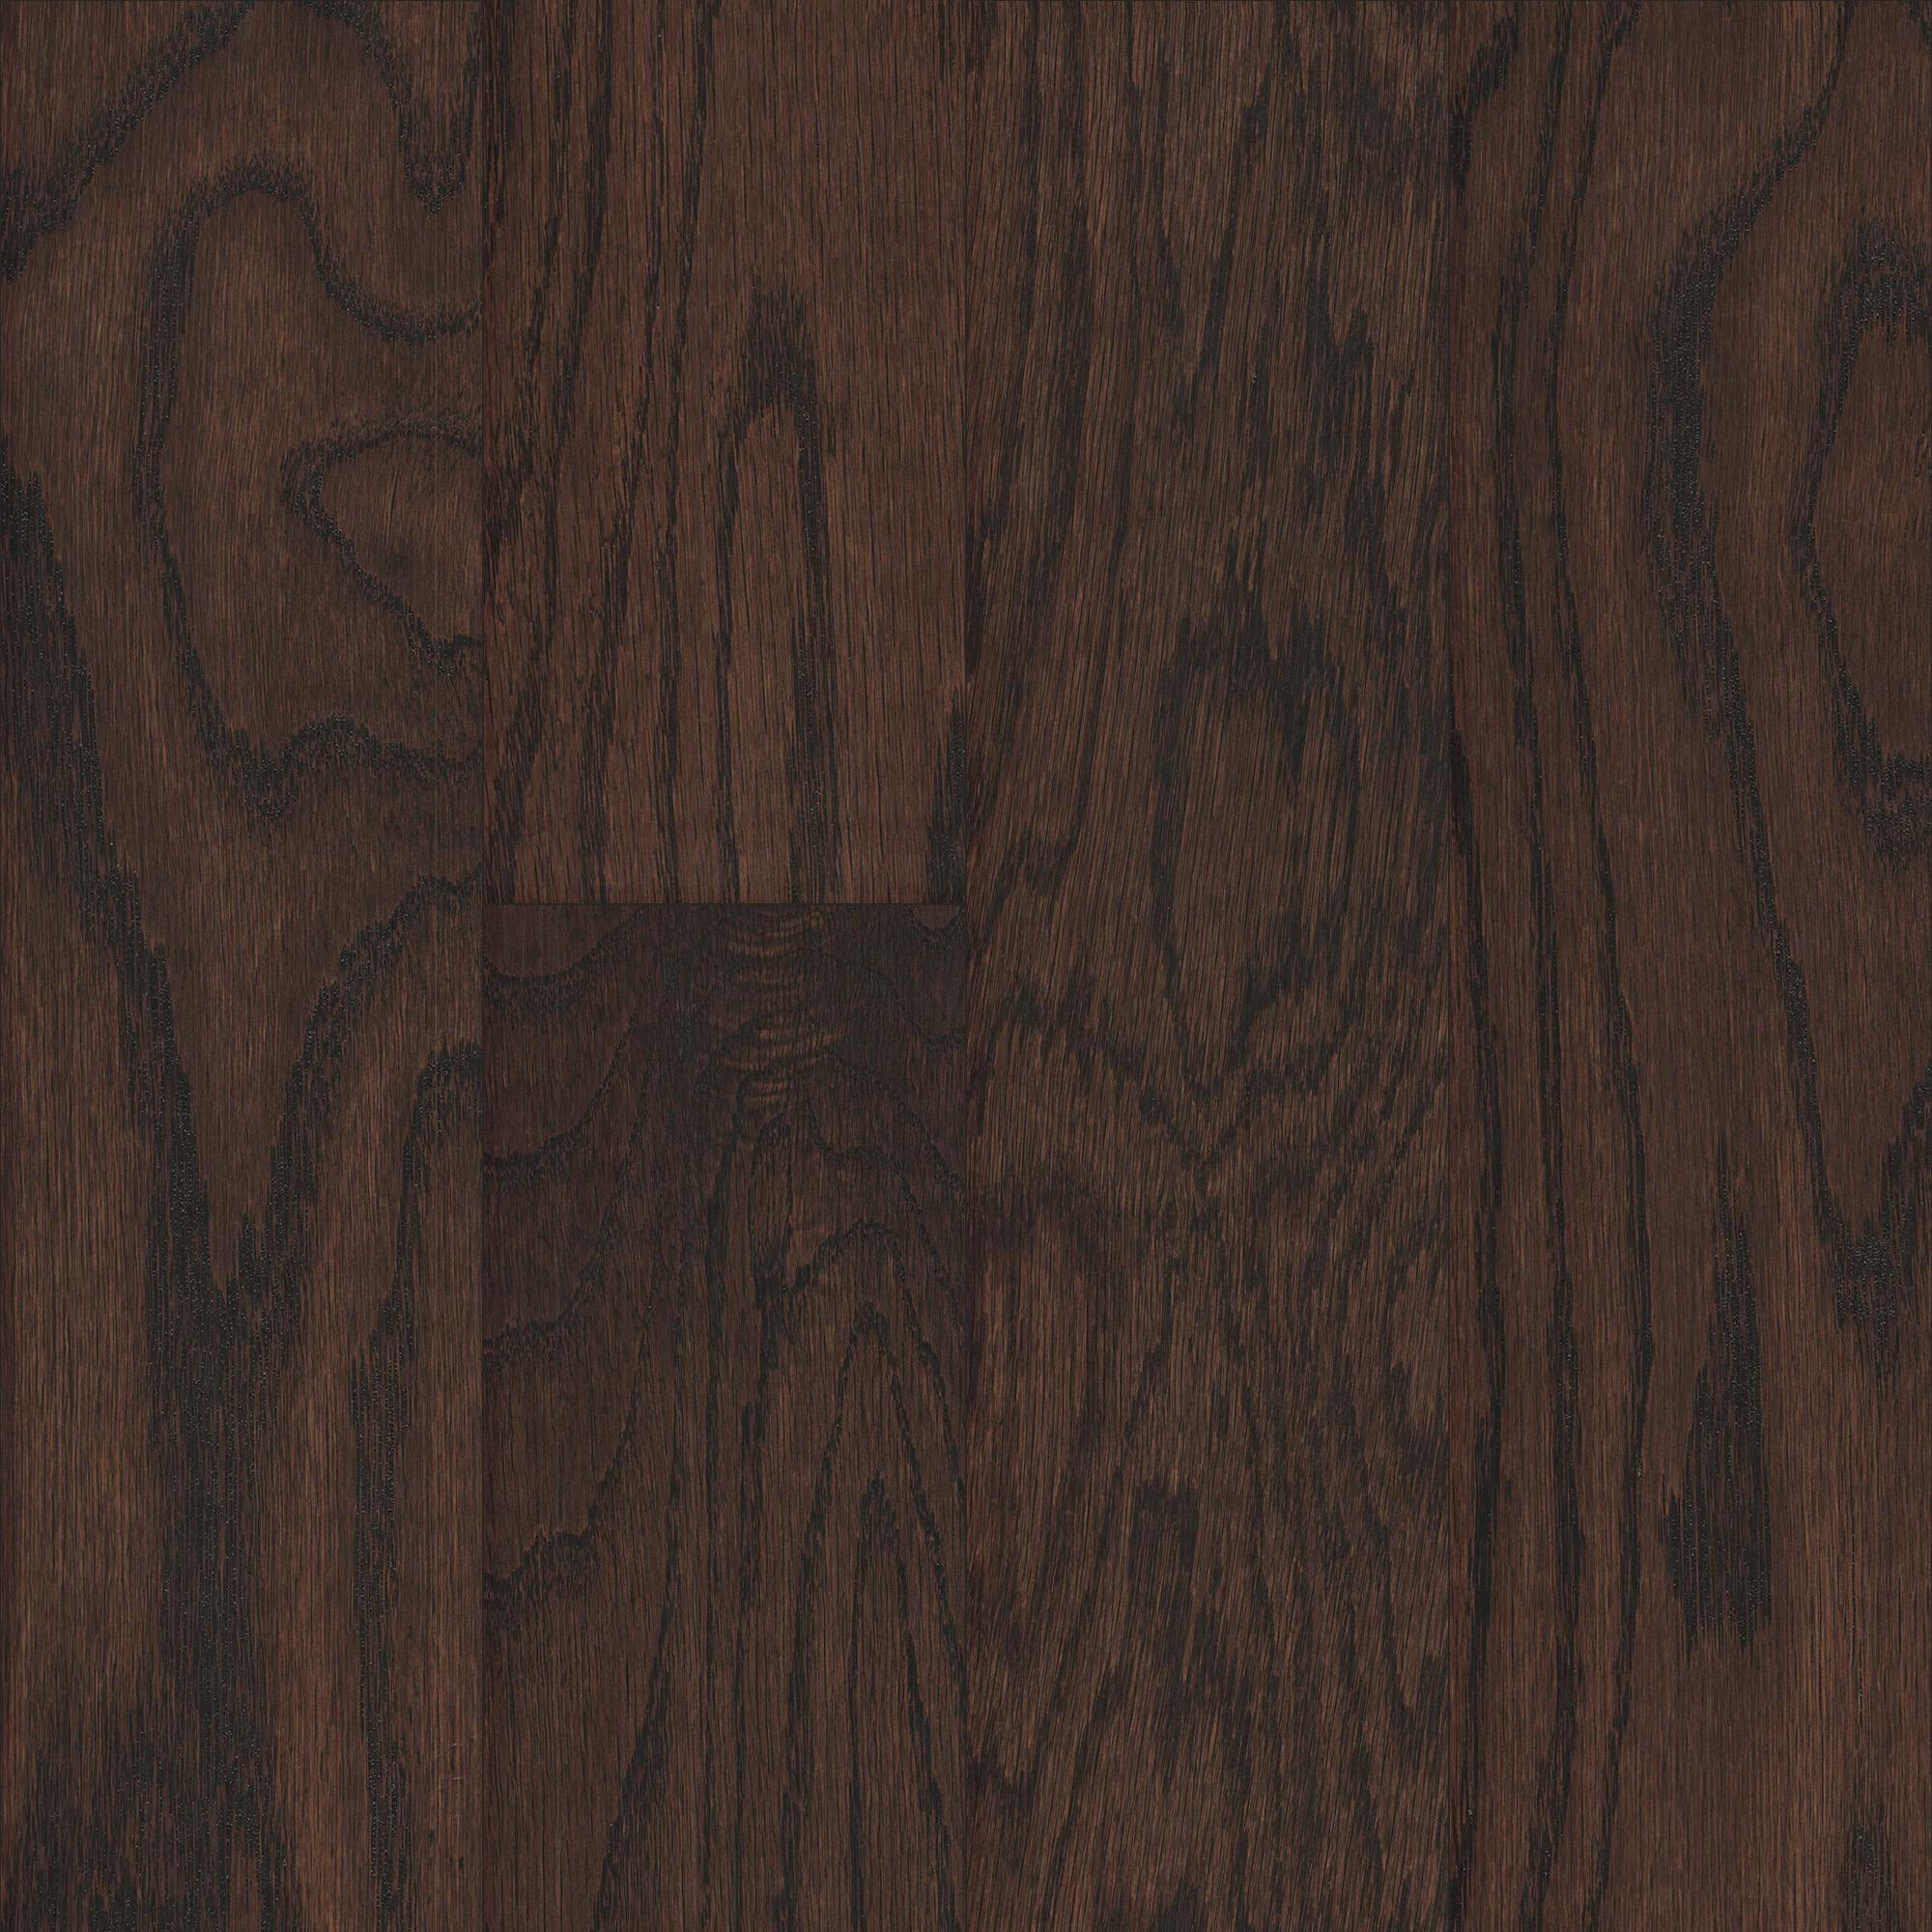 how much does it cost to install engineered hardwood floors of mullican ridgecrest oak burnt umber 1 2 thick 5 wide engineered intended for mullican ridgecrest oak burnt umber 1 2 thick 5 wide engineered hardwood flooring